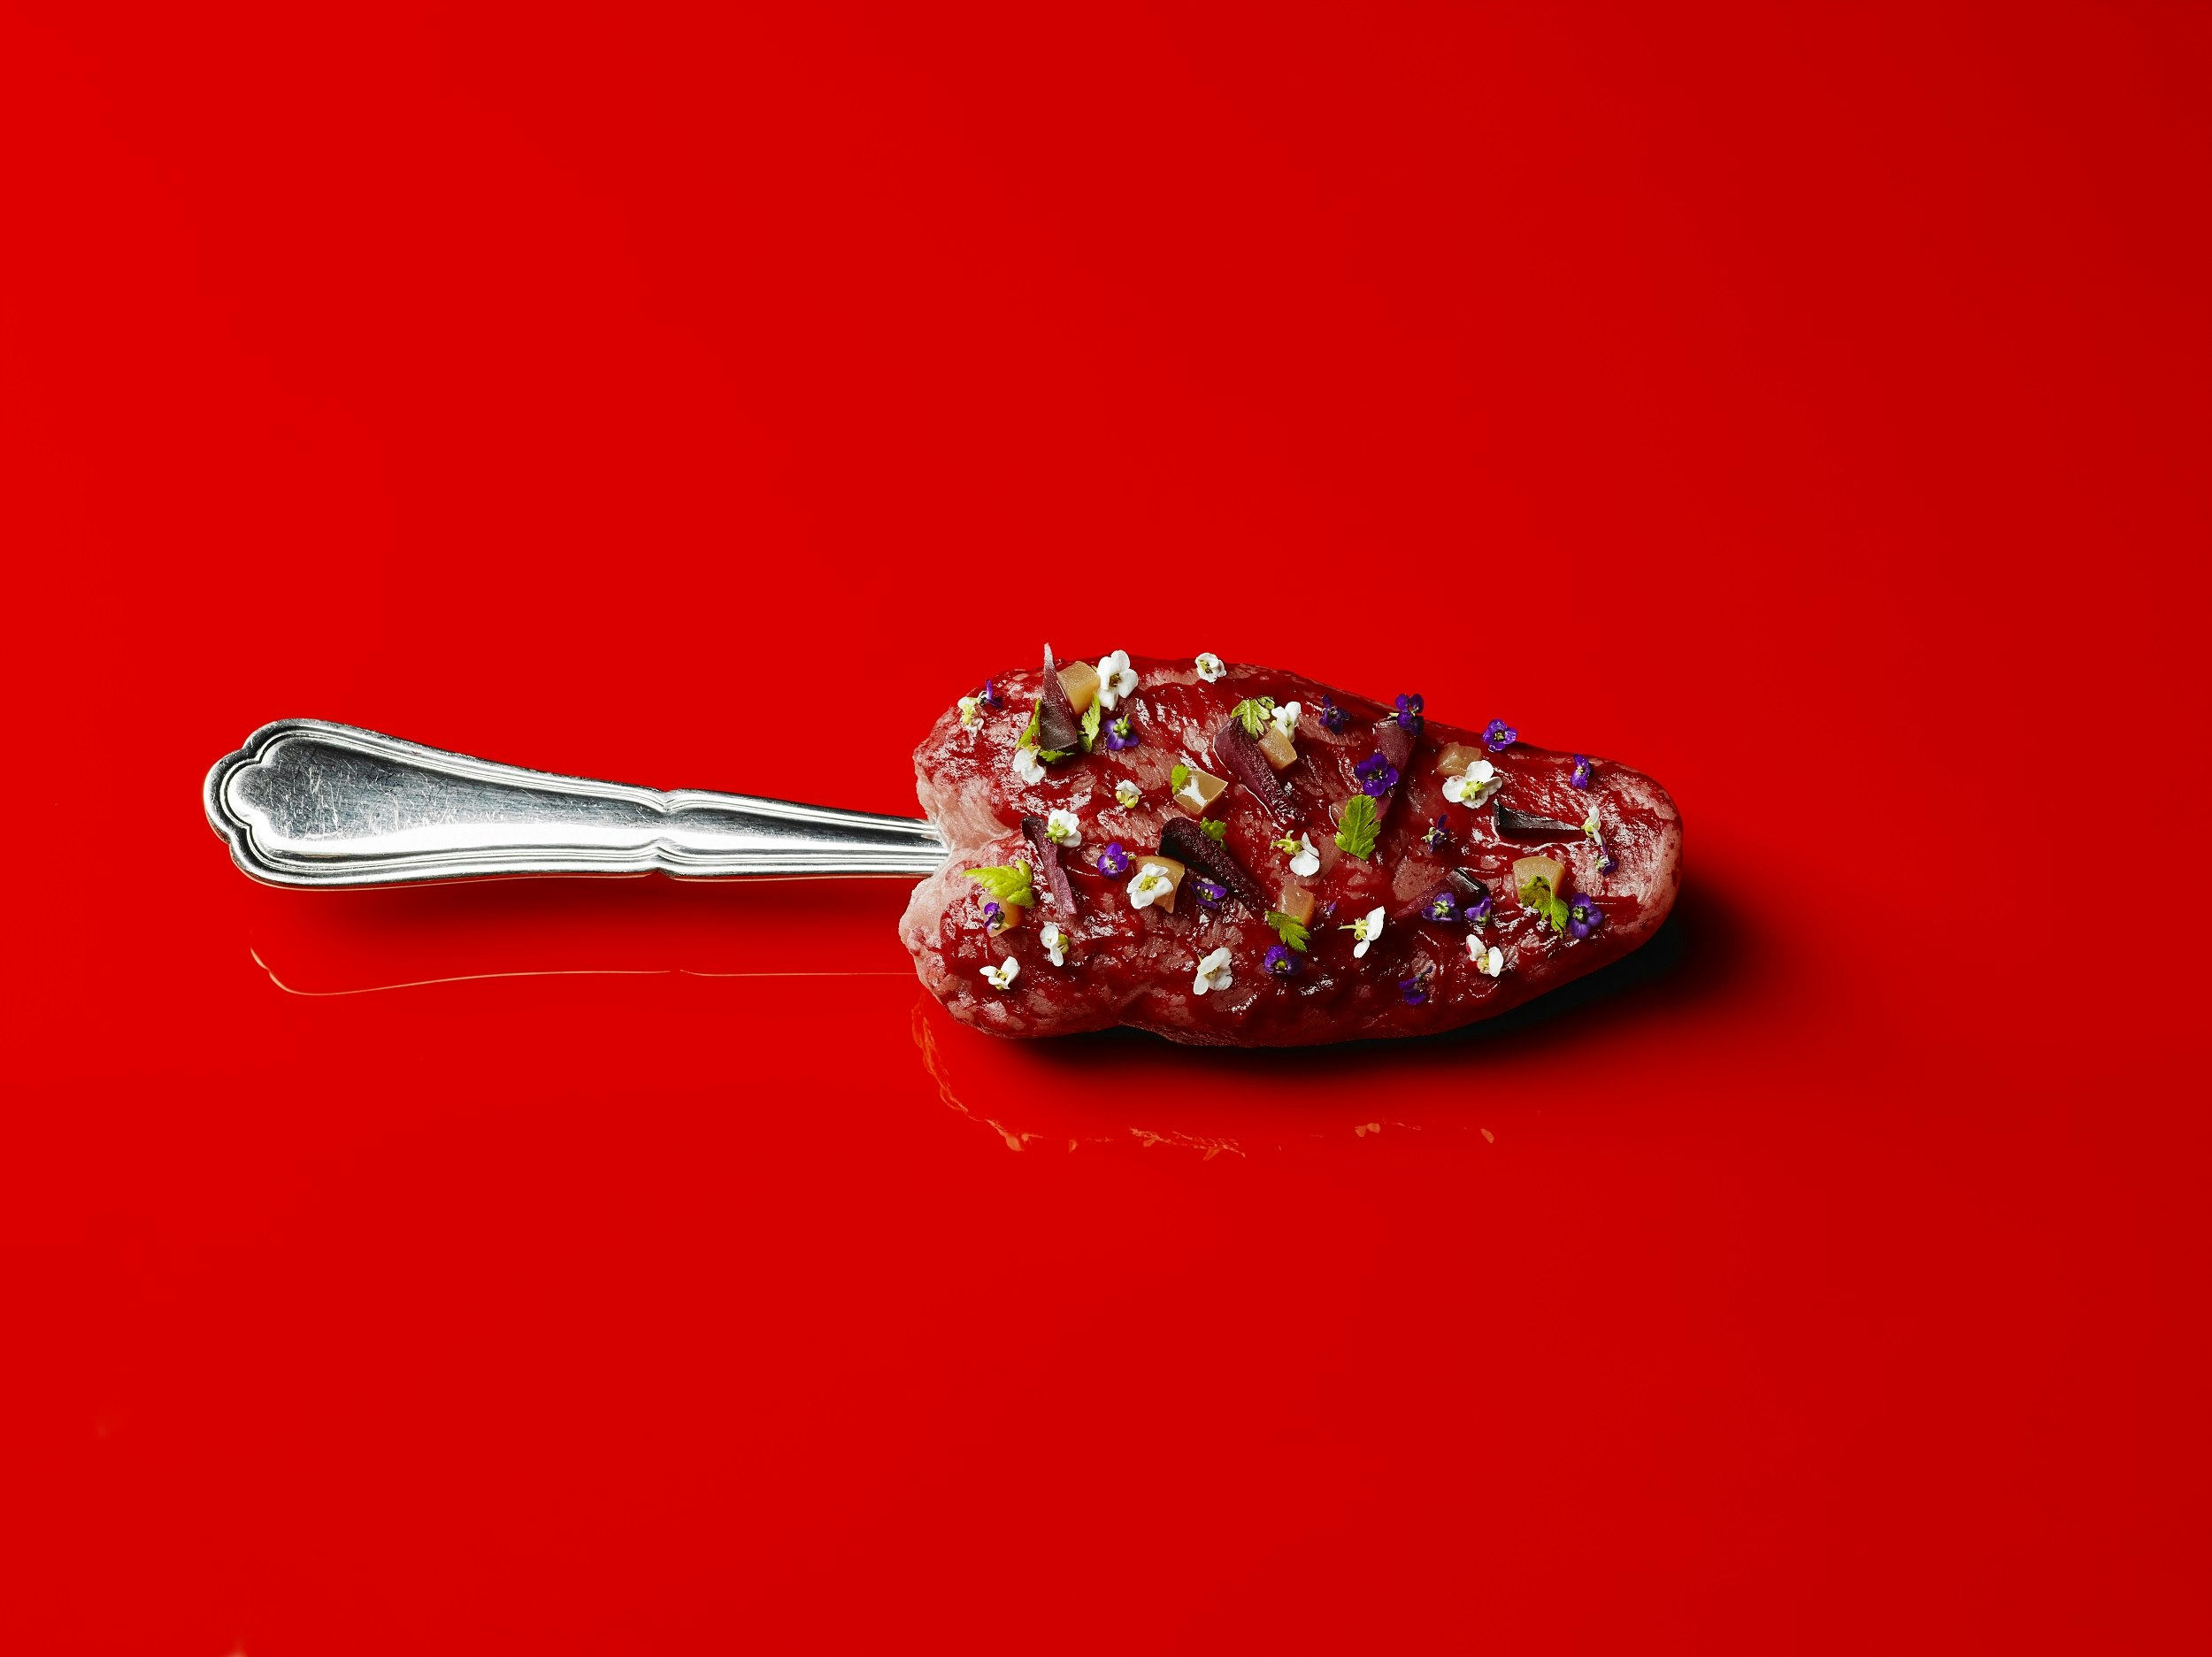 A spoon sits on a bright red background; the handle protrudes from what looks like a tongue covered in small leaves and flowers. It resembles at ornate and beautiful popsicle.